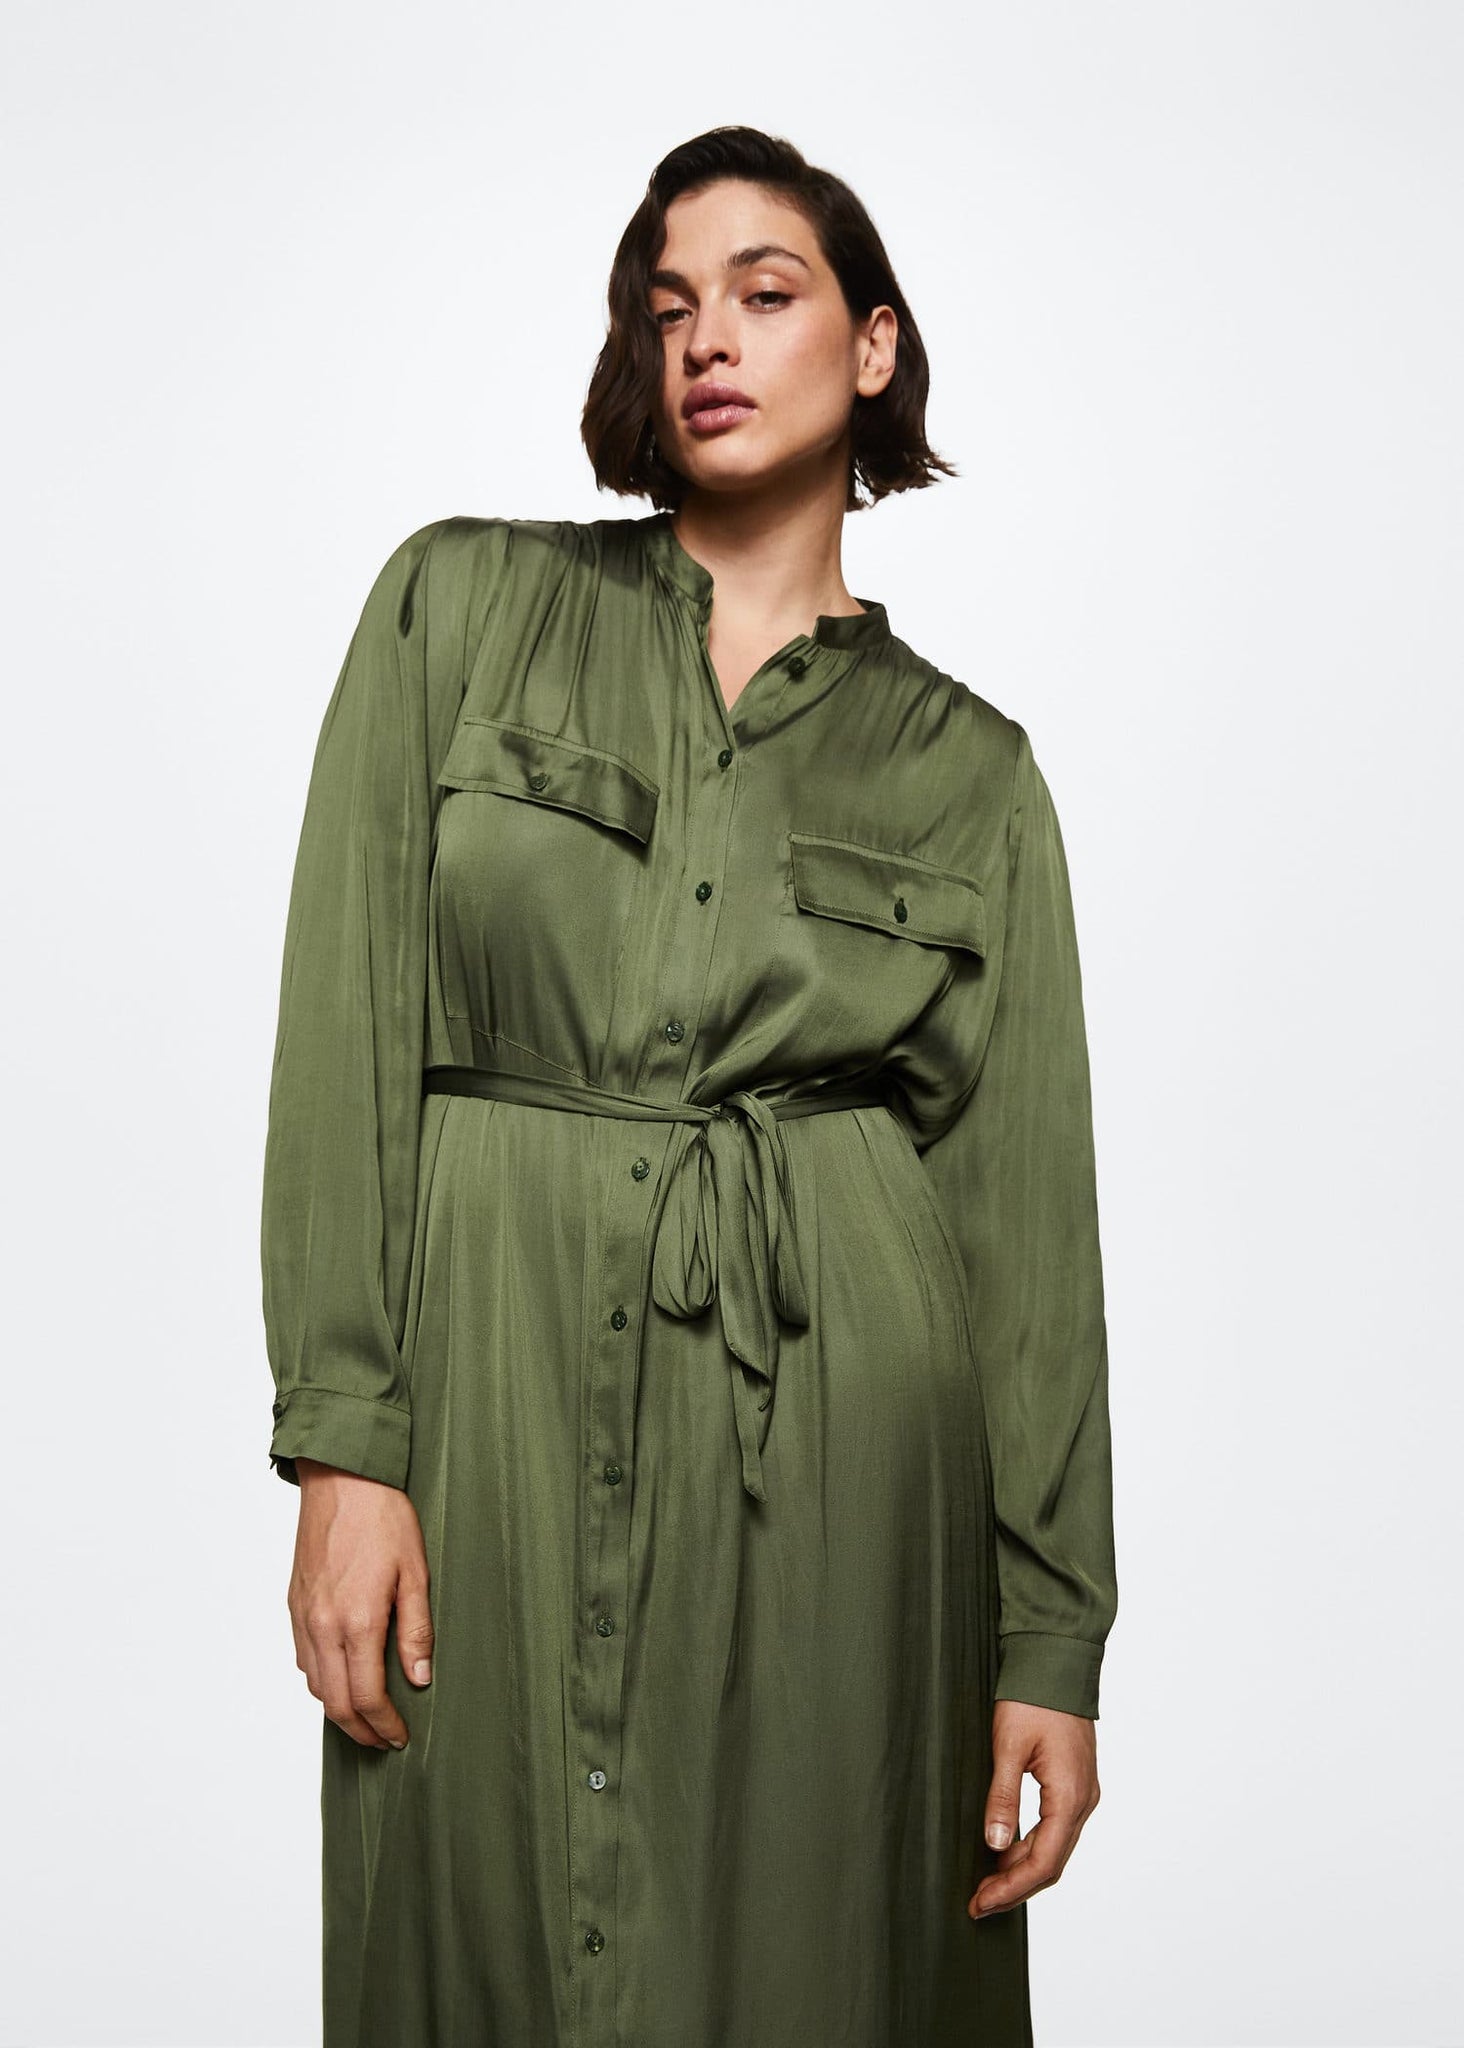 Satin shirt dress - Details of the article 5